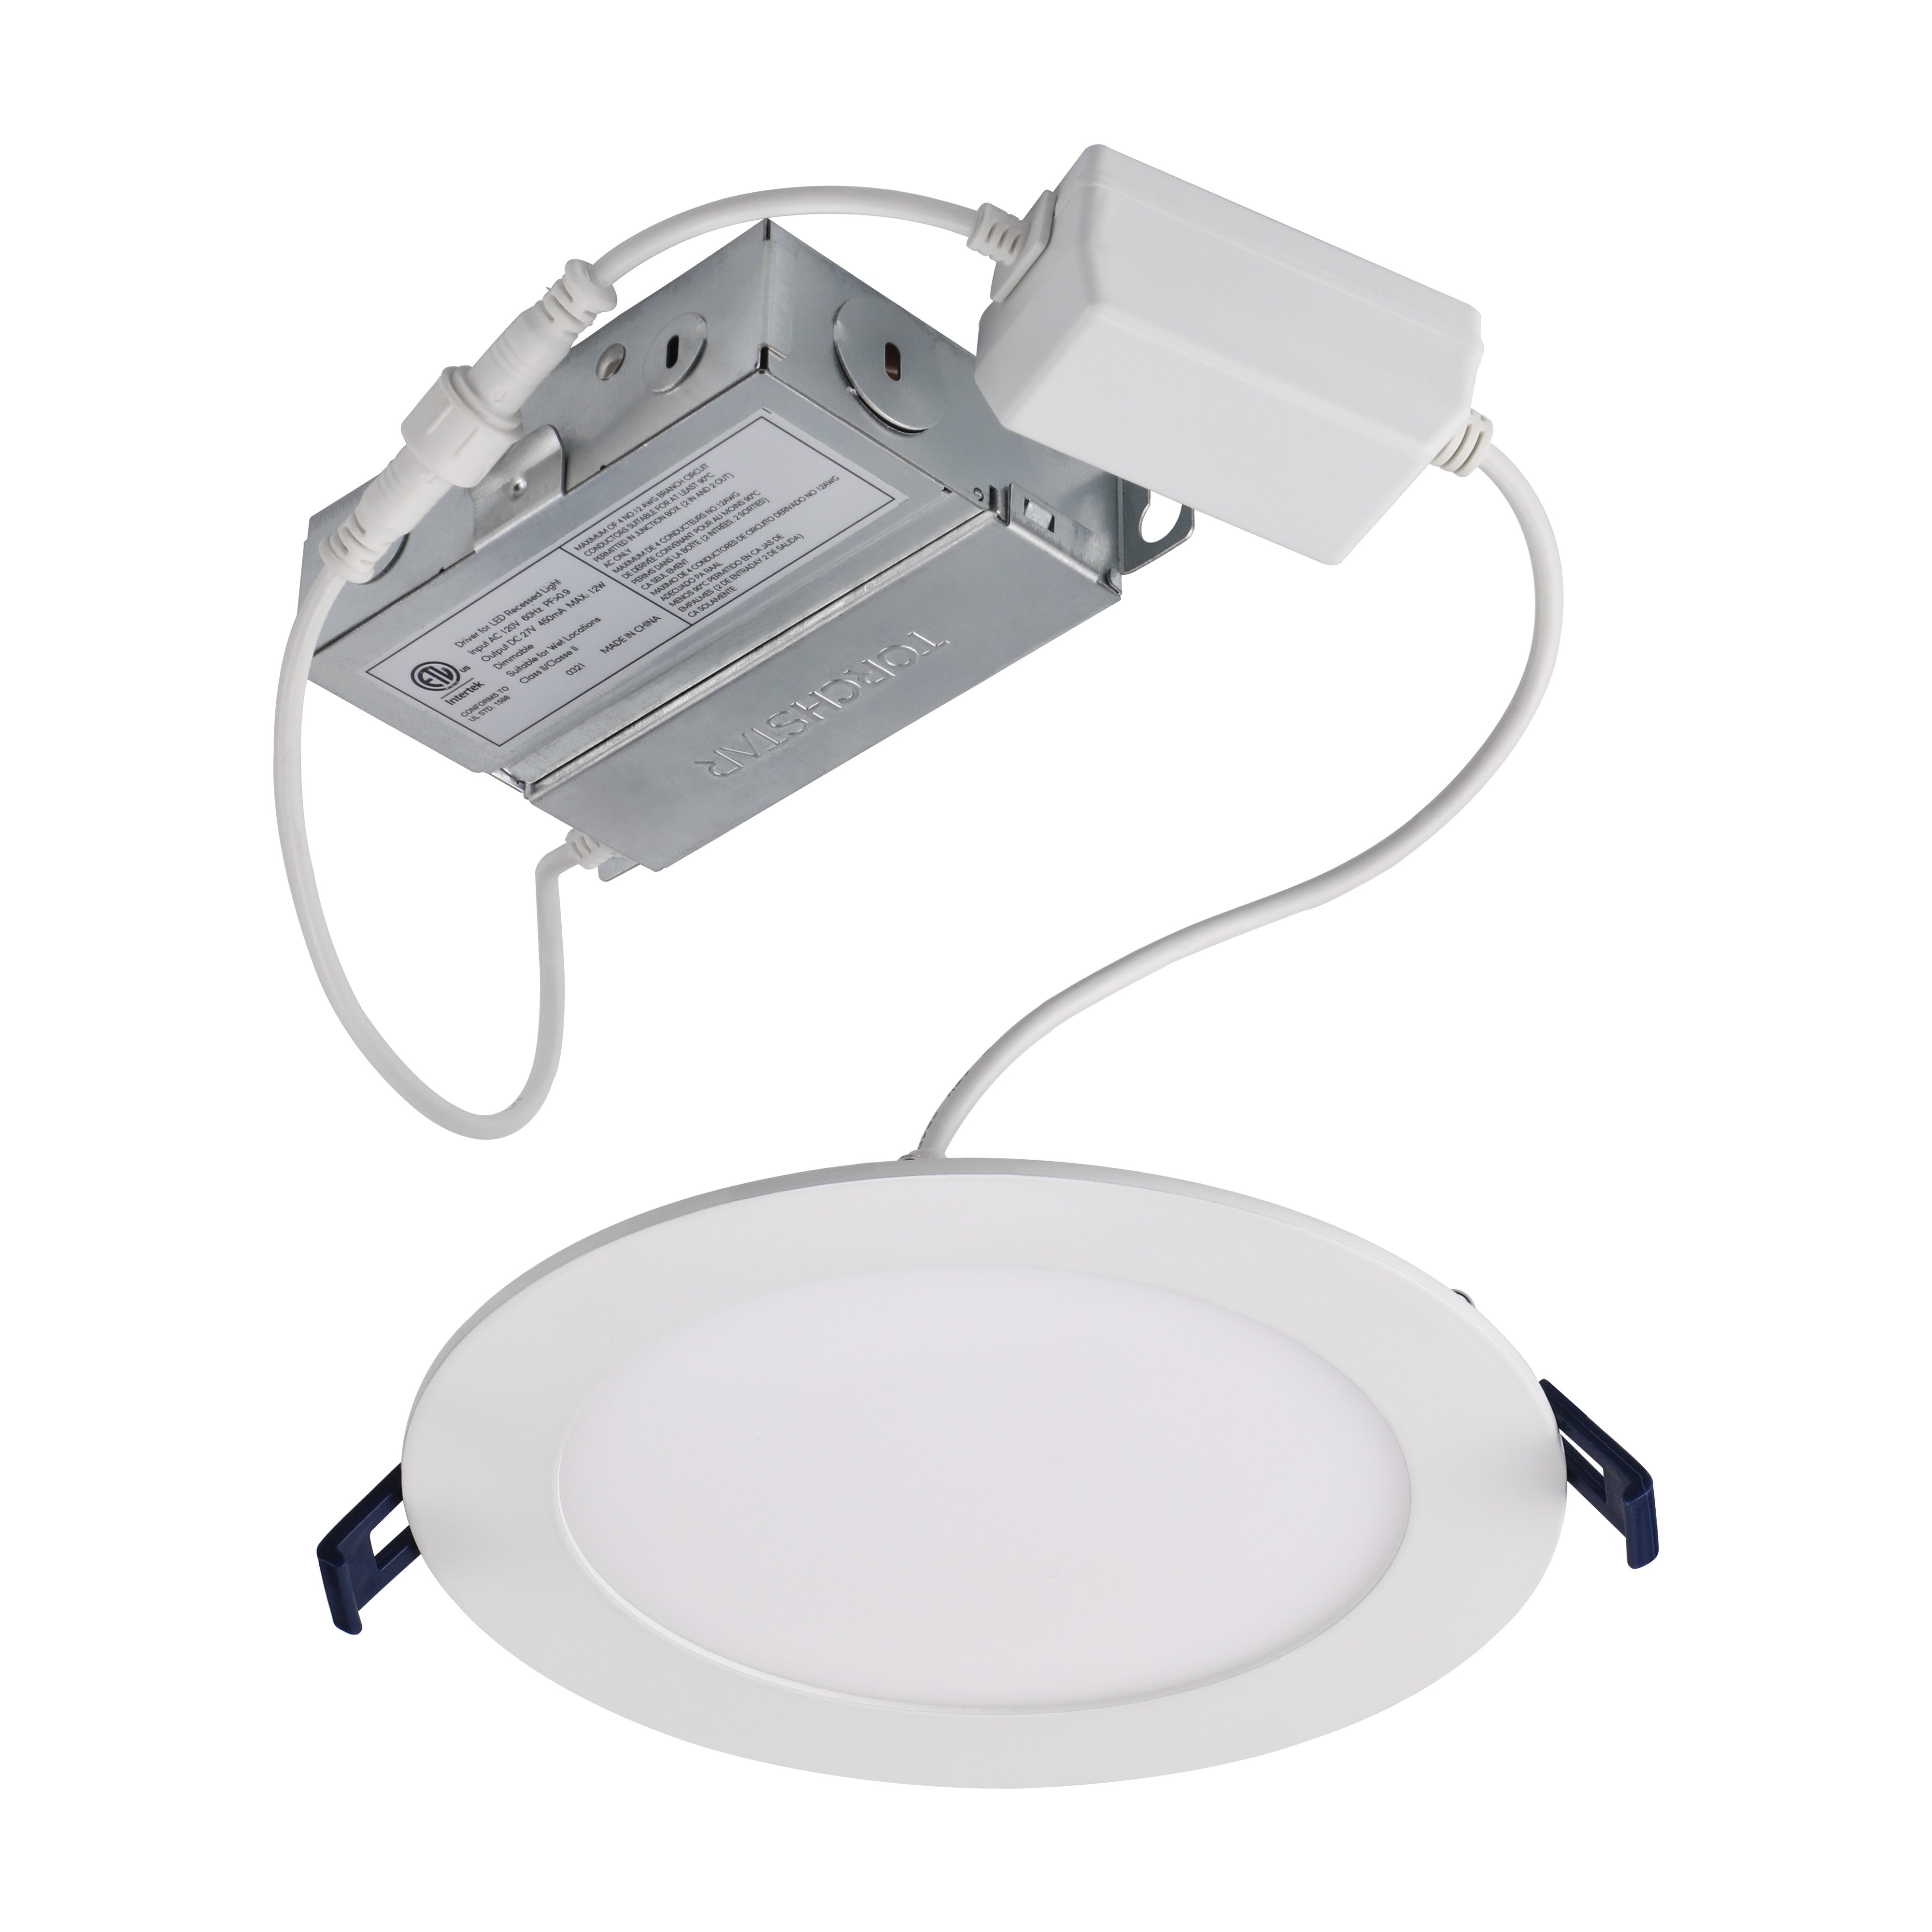 LITEdge 6" LED Smart Recessed Light - 12W - Adjustable CCT and Color